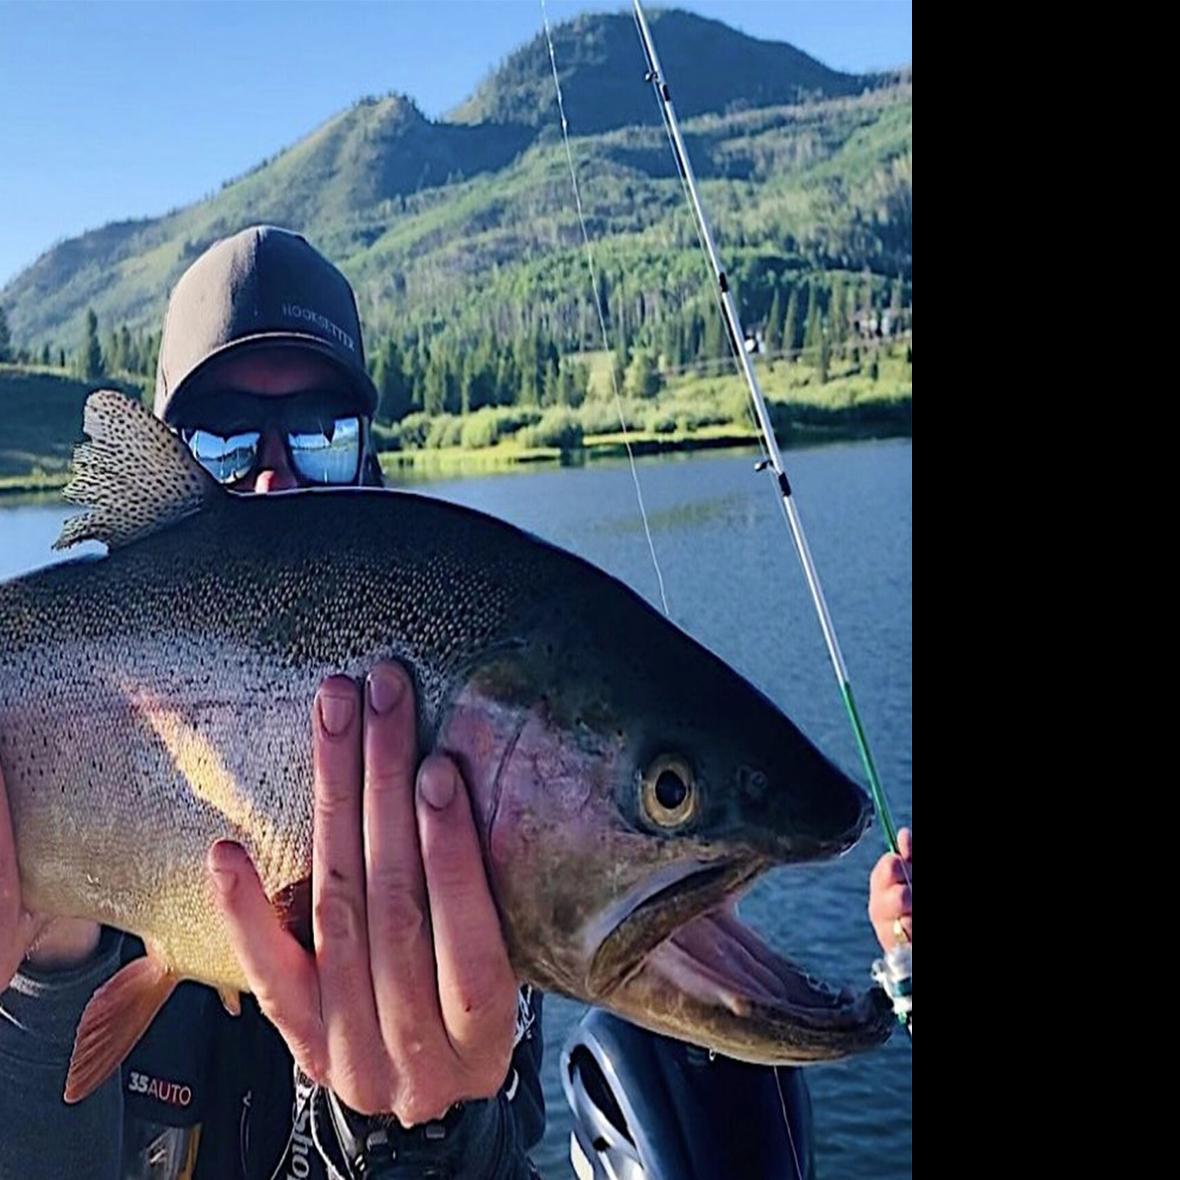 Colorado fisherman reels in likely record-breaking trout, but